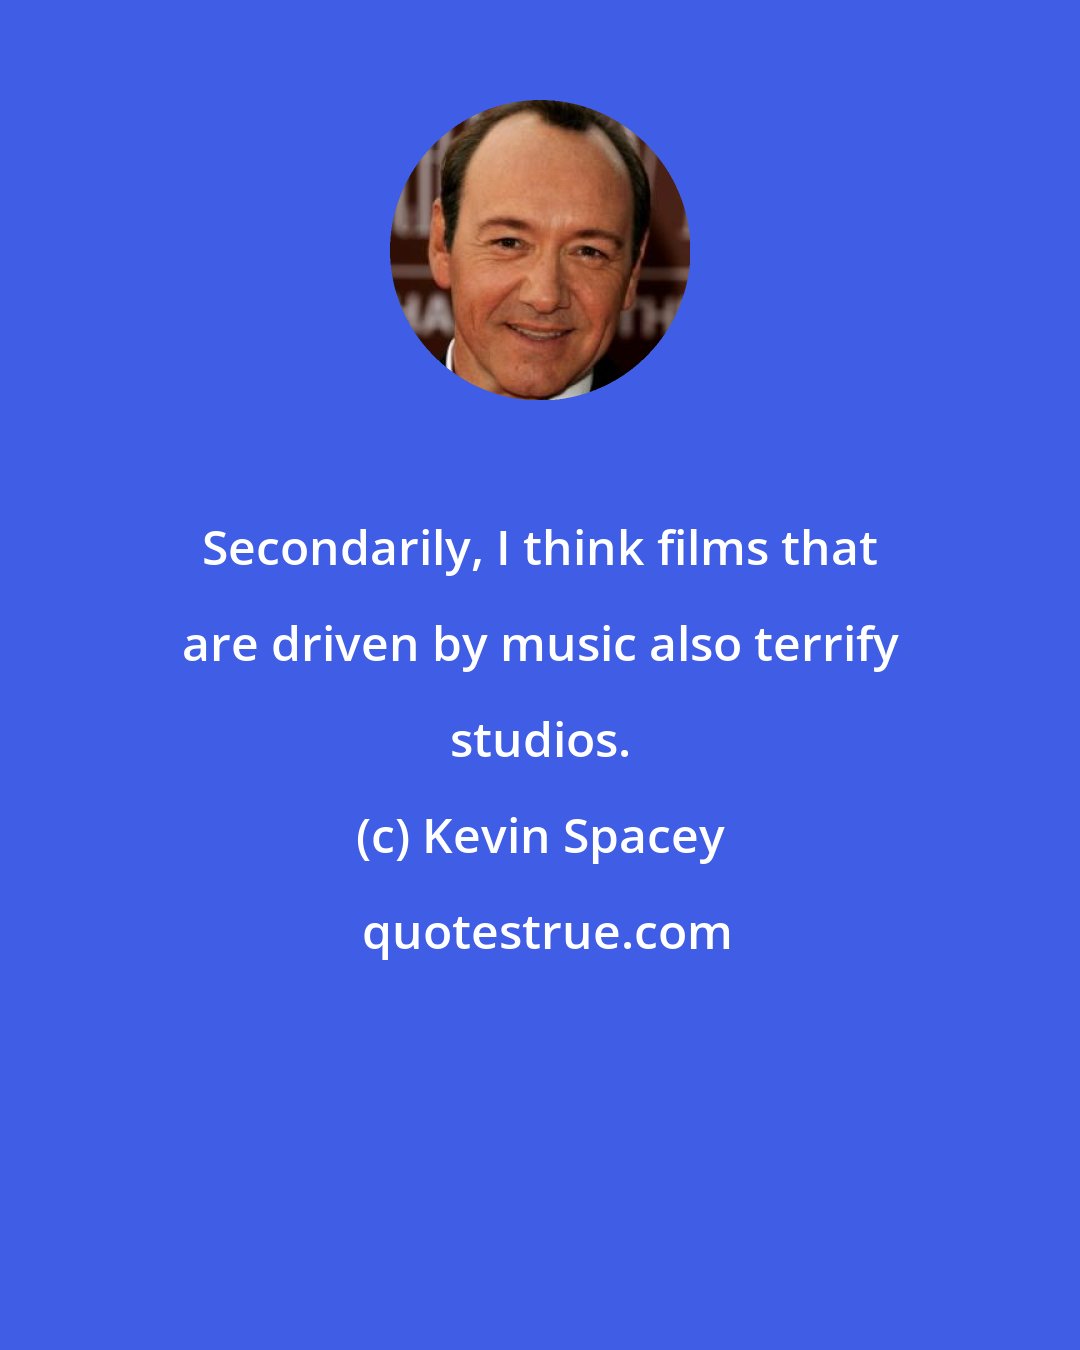 Kevin Spacey: Secondarily, I think films that are driven by music also terrify studios.